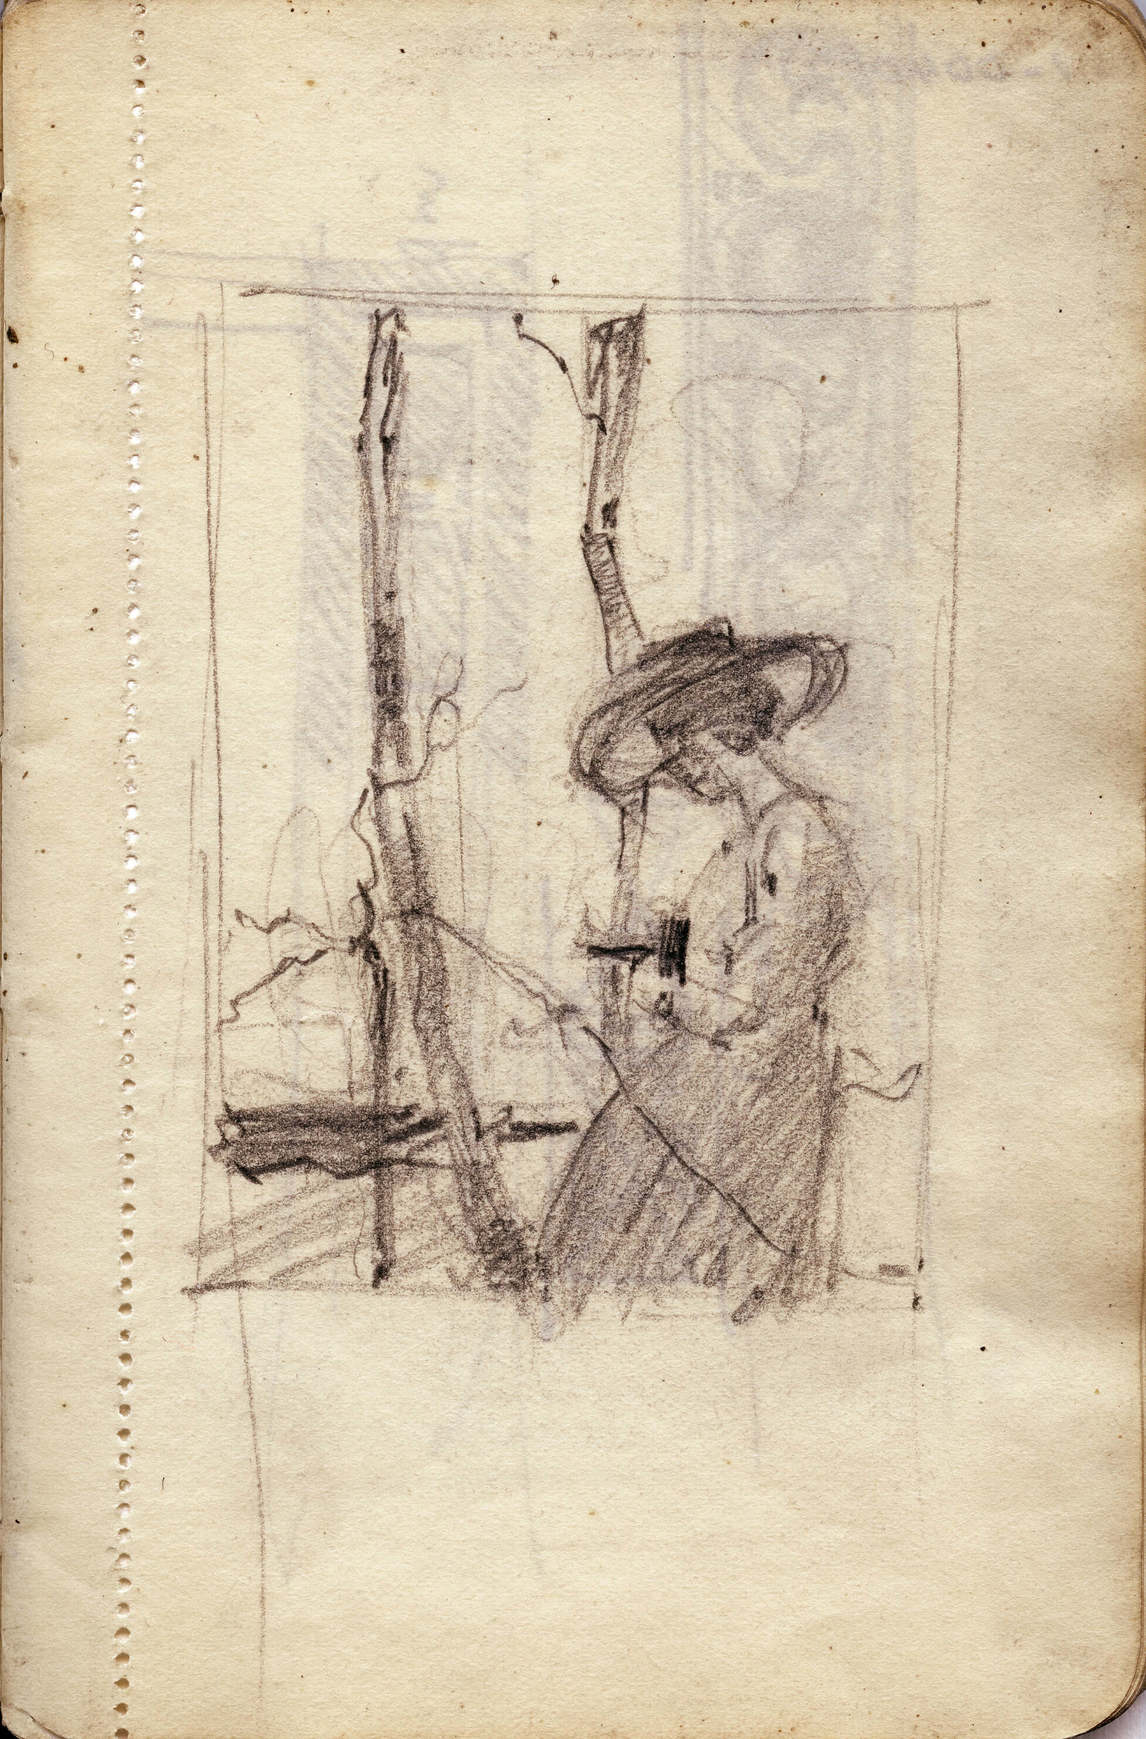 Art Canada Institute, Lionel LeMoine FitzGerald, Sketchbook study for Woman with Camera Outdoors, c. 1917